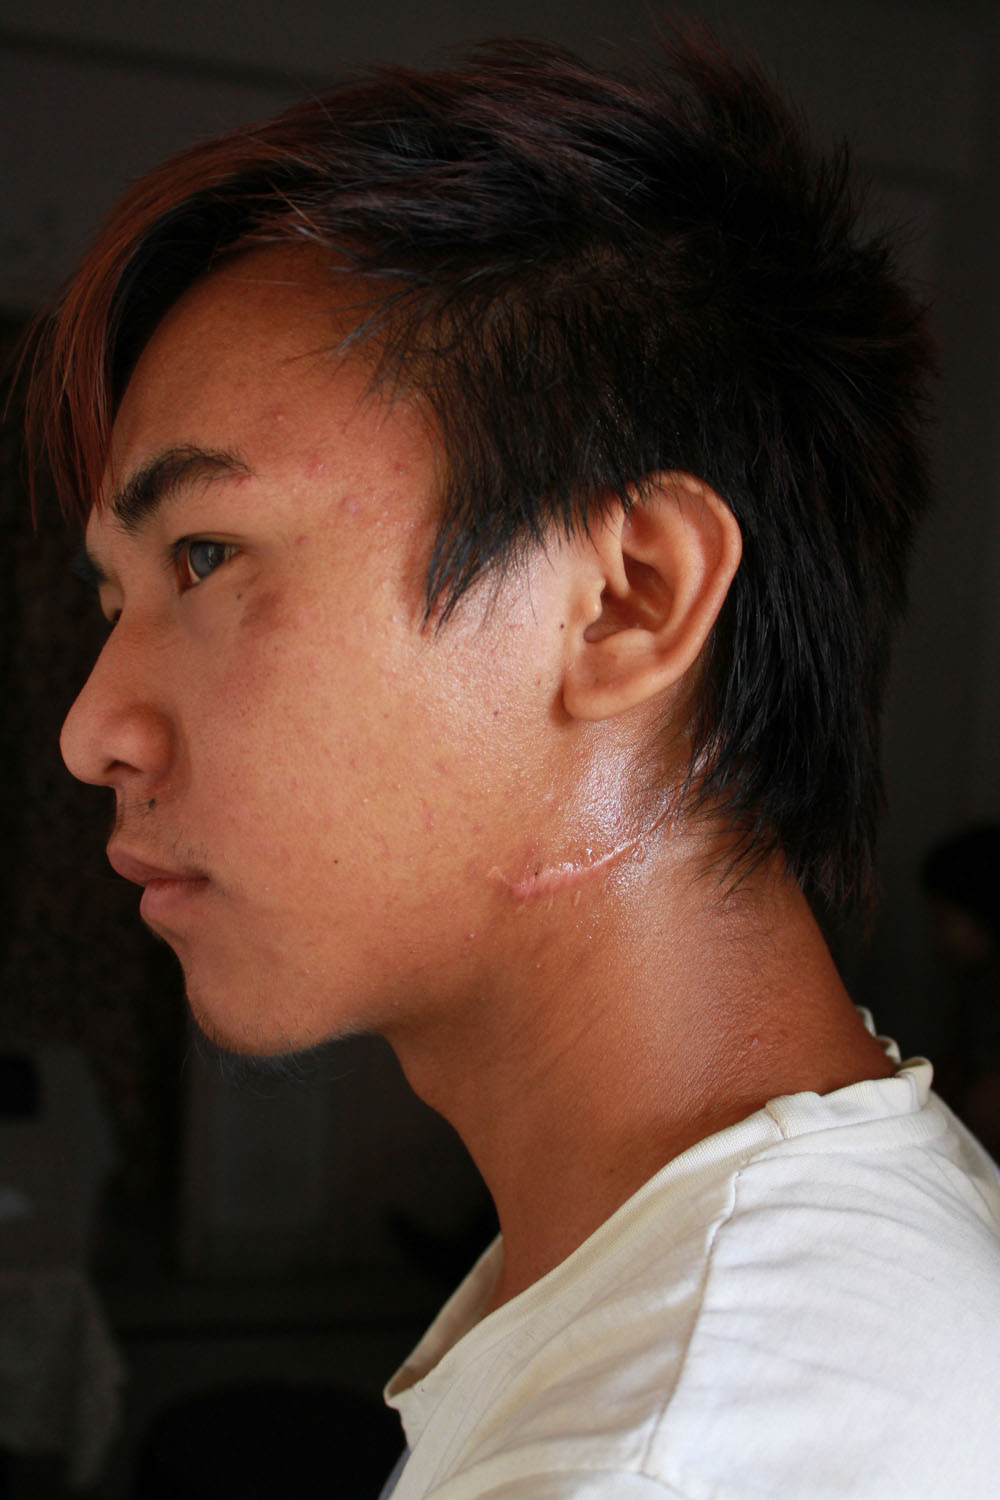 Tizano, 18 year old orphan living alone in Delhi, showing the scar in his neck. 